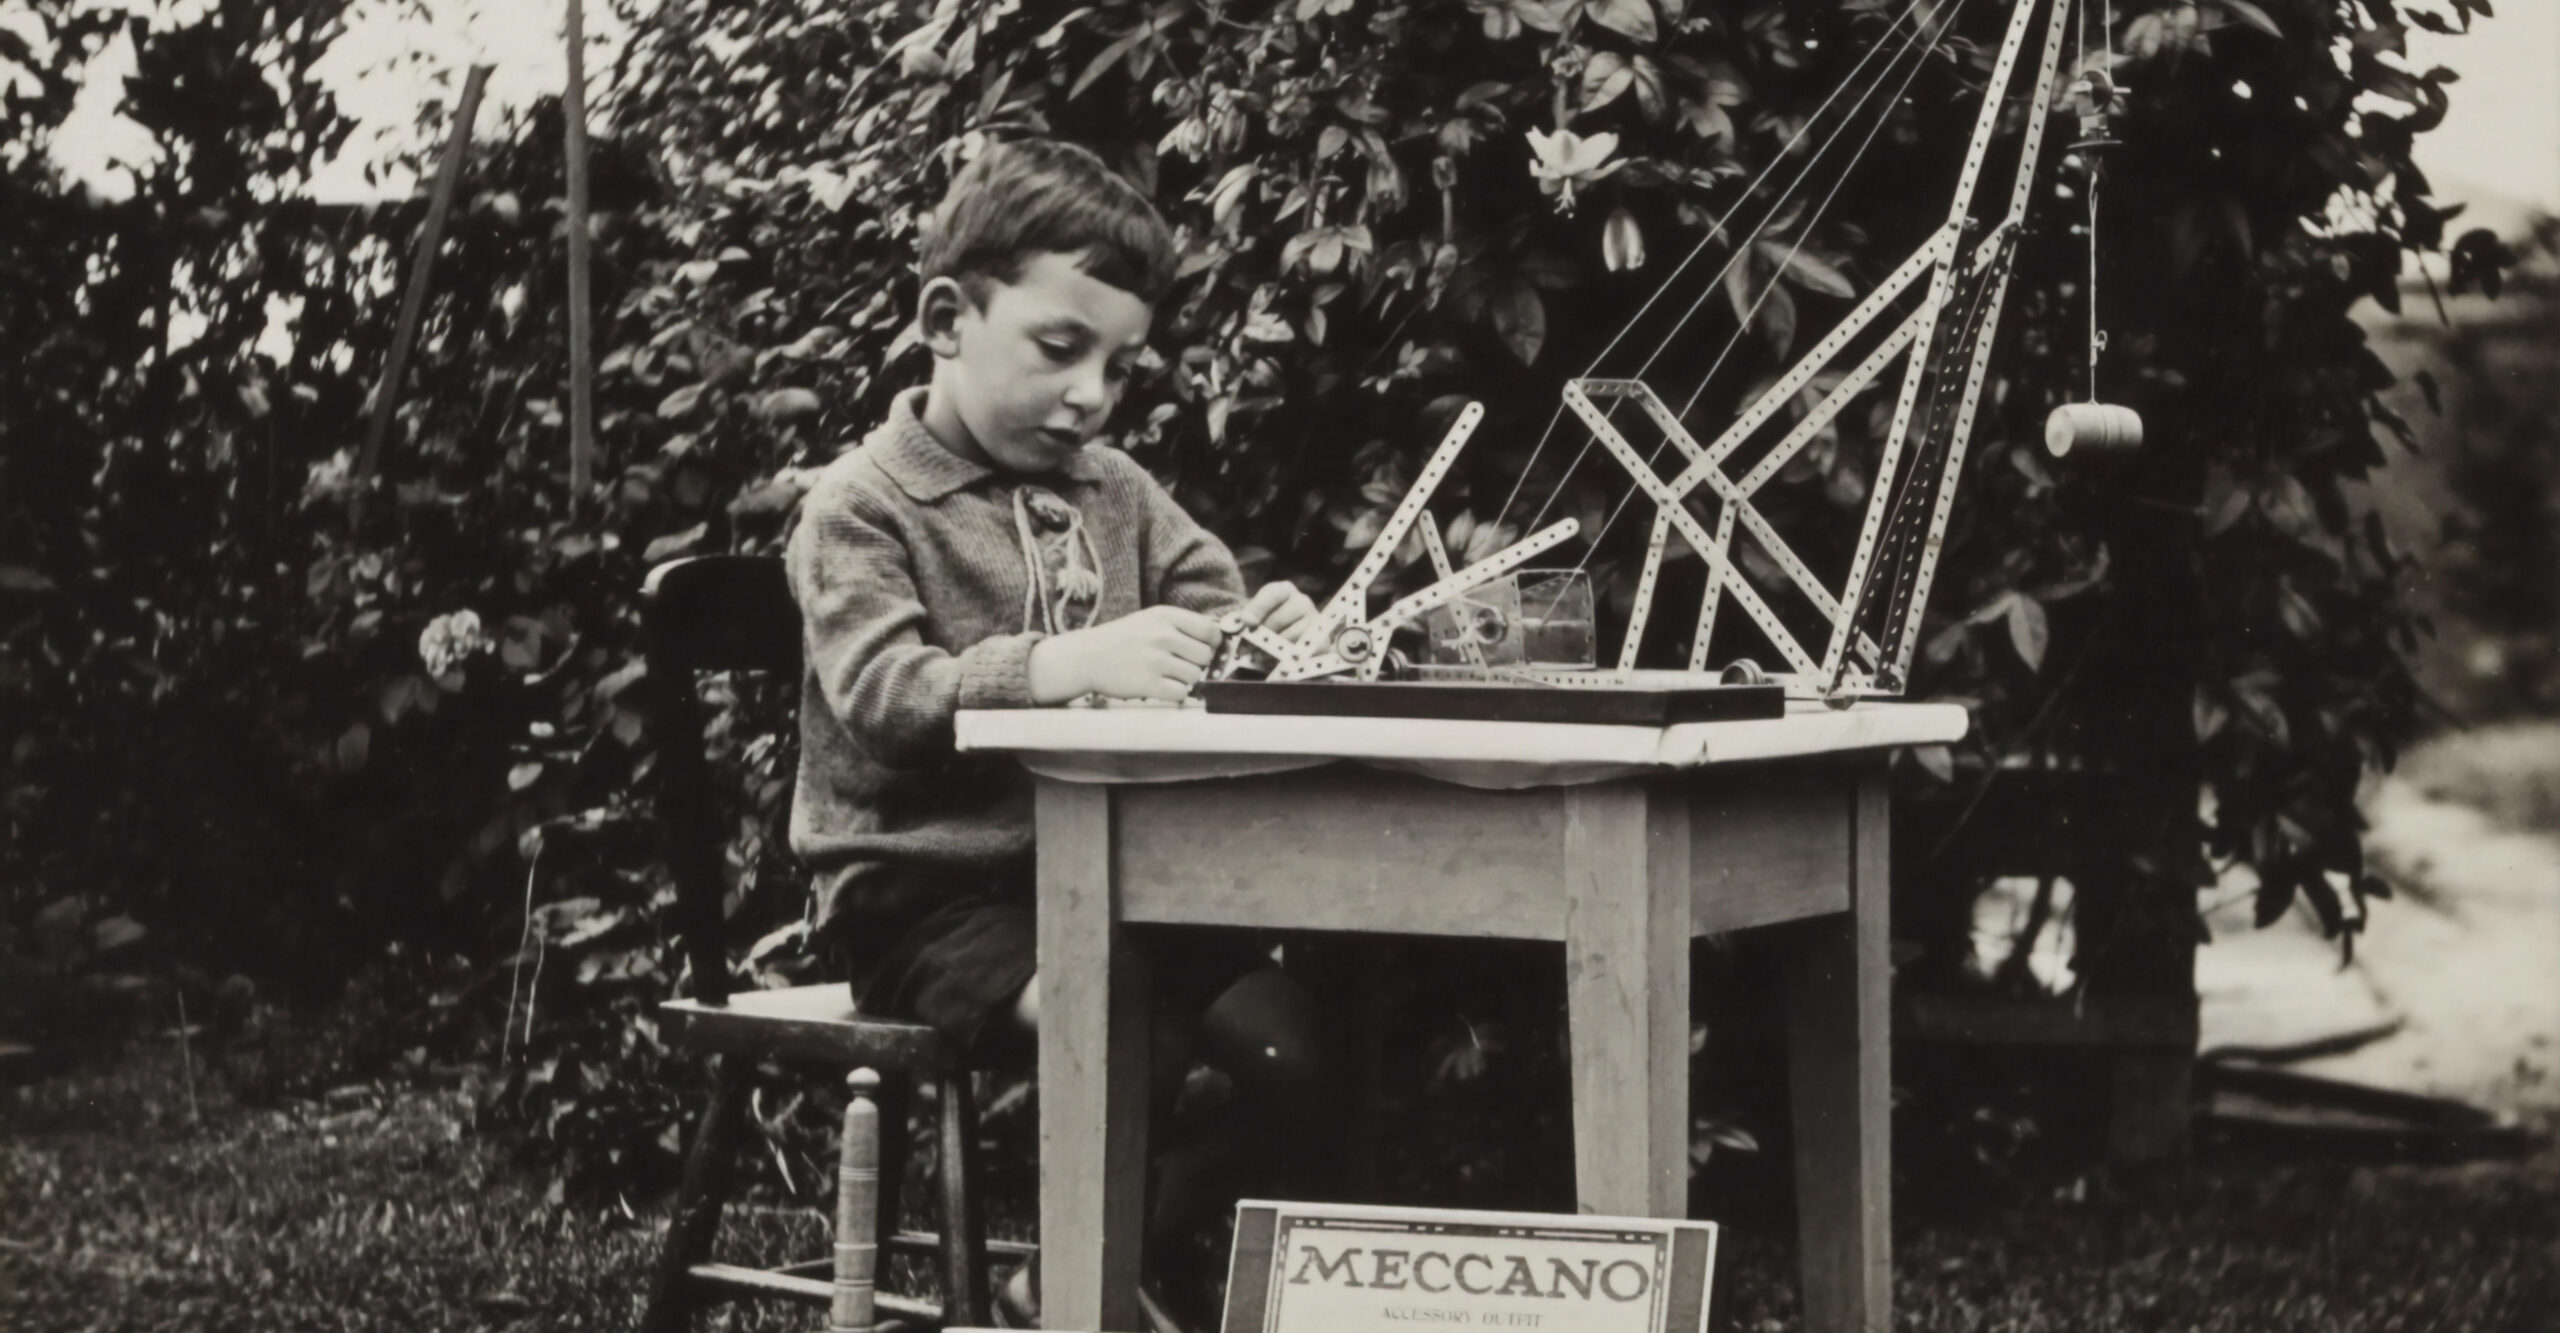 historical photo of a boy with meccano in the garden